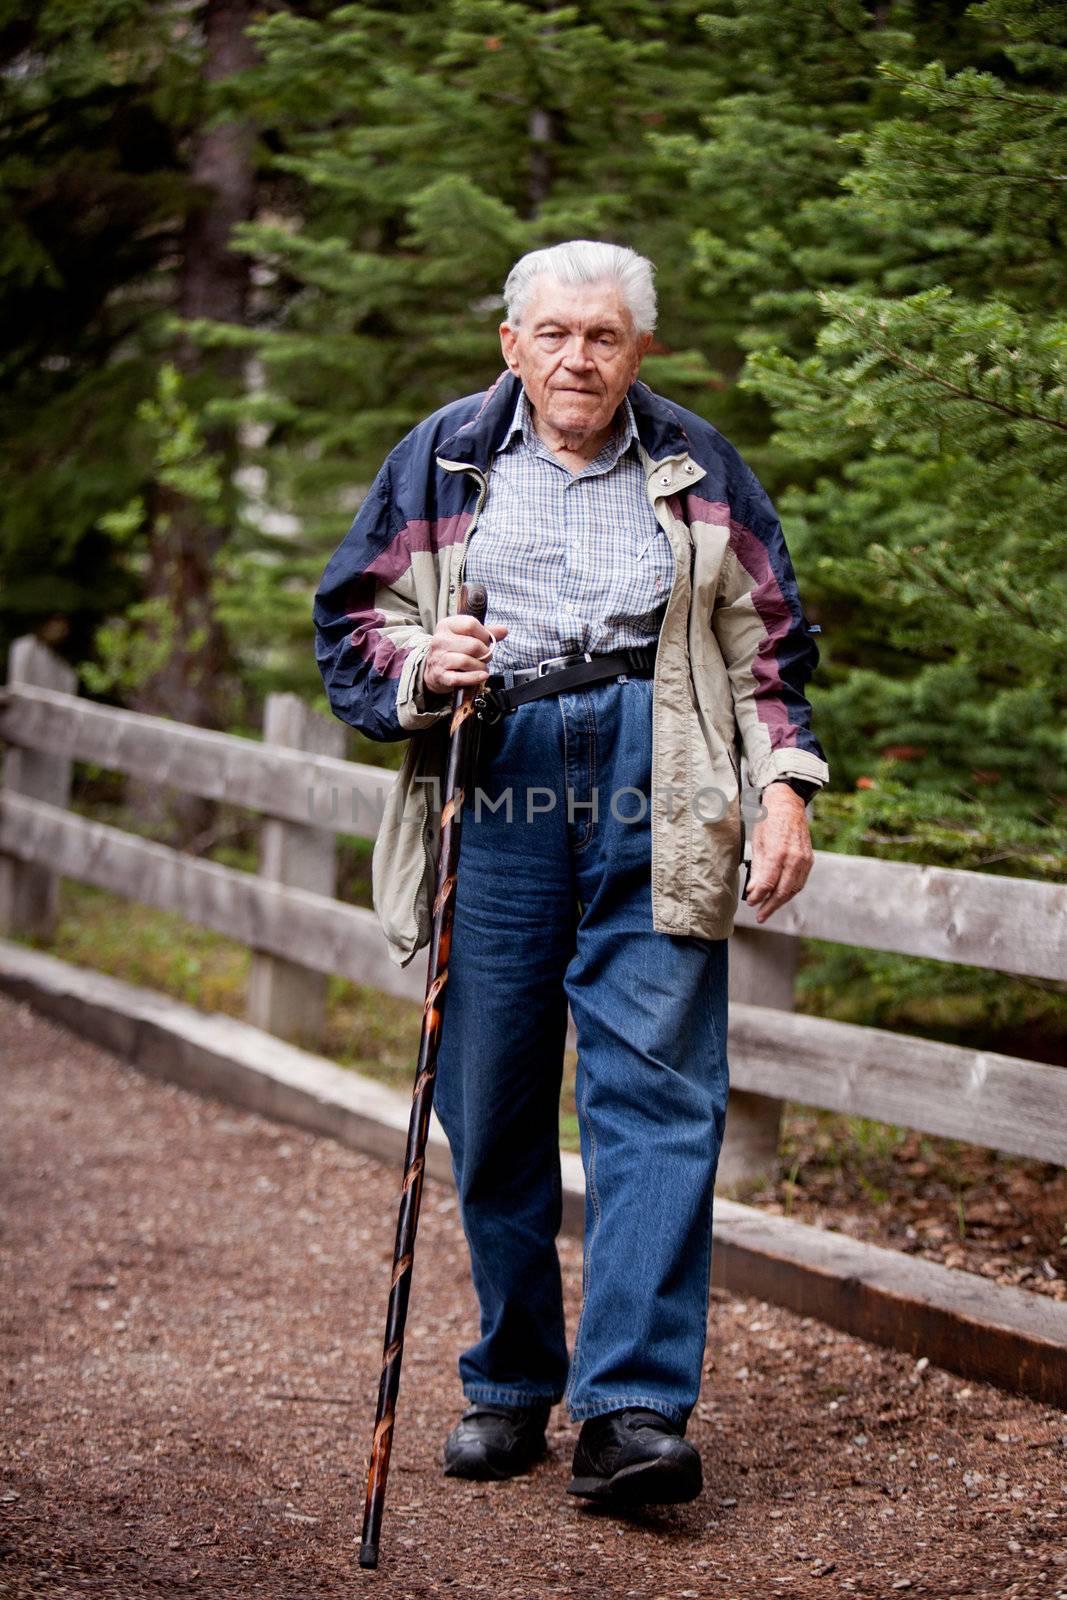 An elderly man walking on a path through the forest